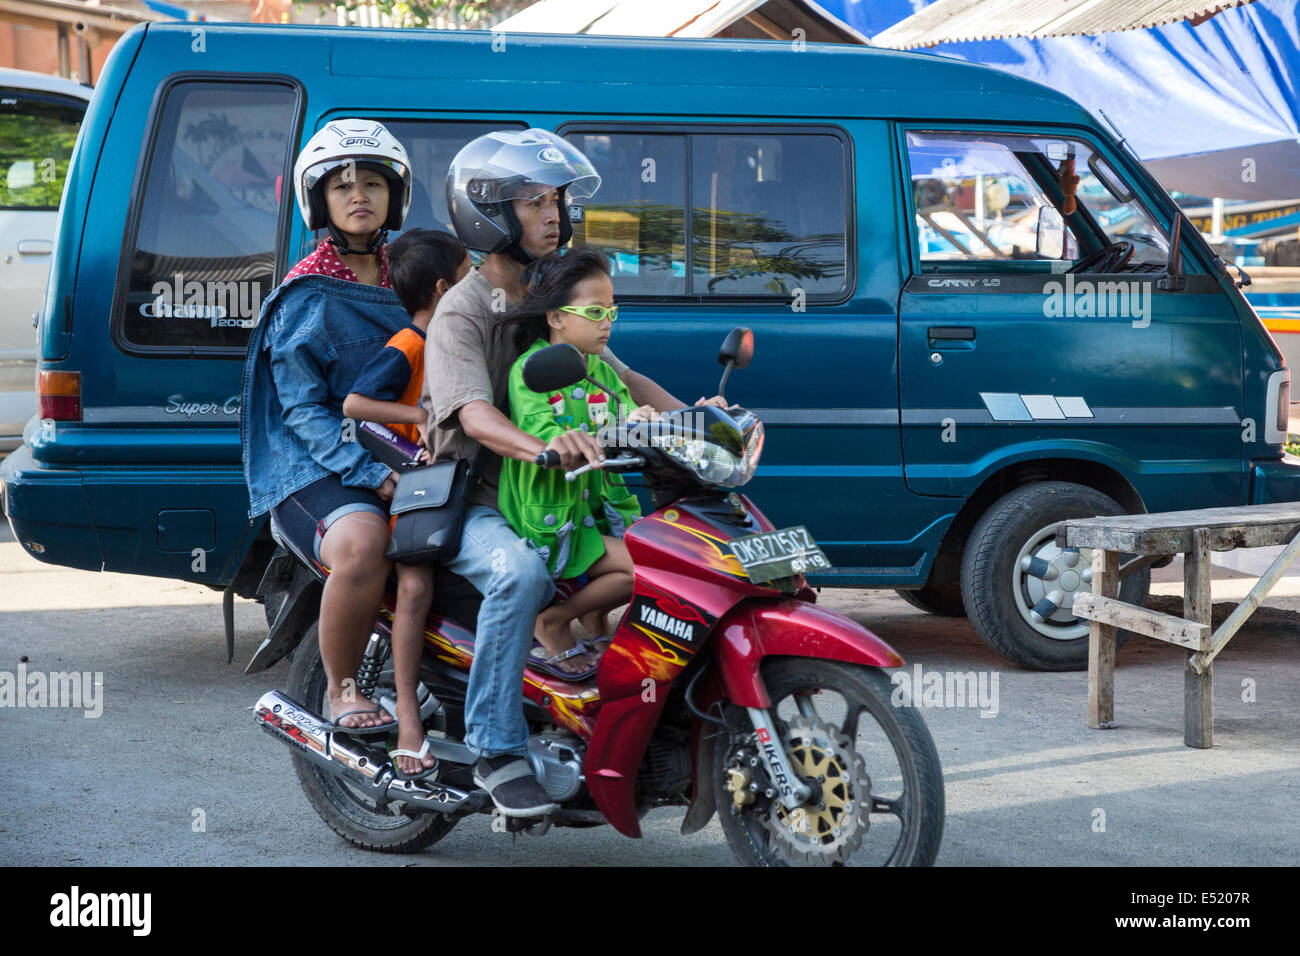 Jimbaran, Bali, Indonesia.  Family on Motorbike.  Adults with Helmets, Children Without. Stock Photo